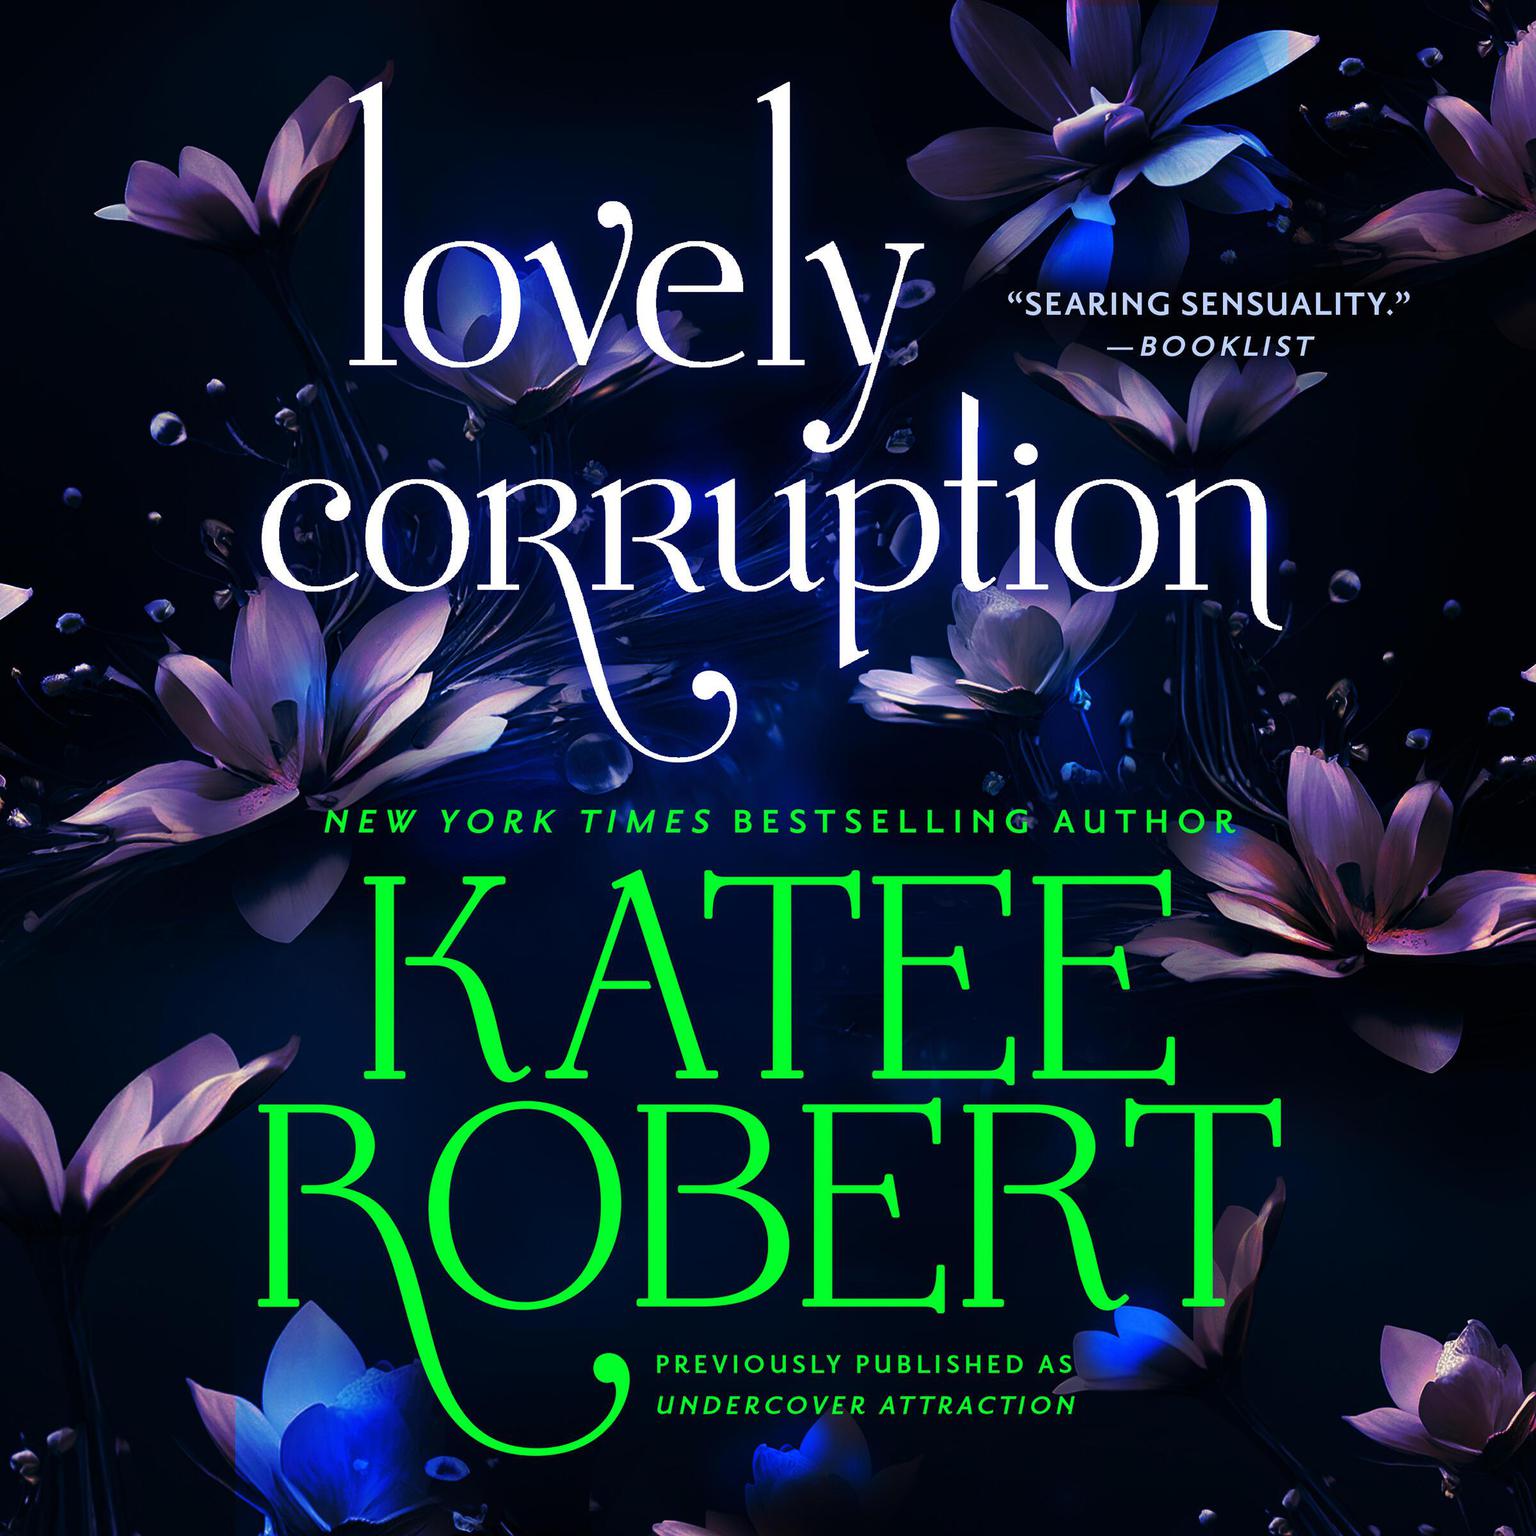 Lovely Corruption (previously published as Undercover Attraction) Audiobook, by Katee Robert